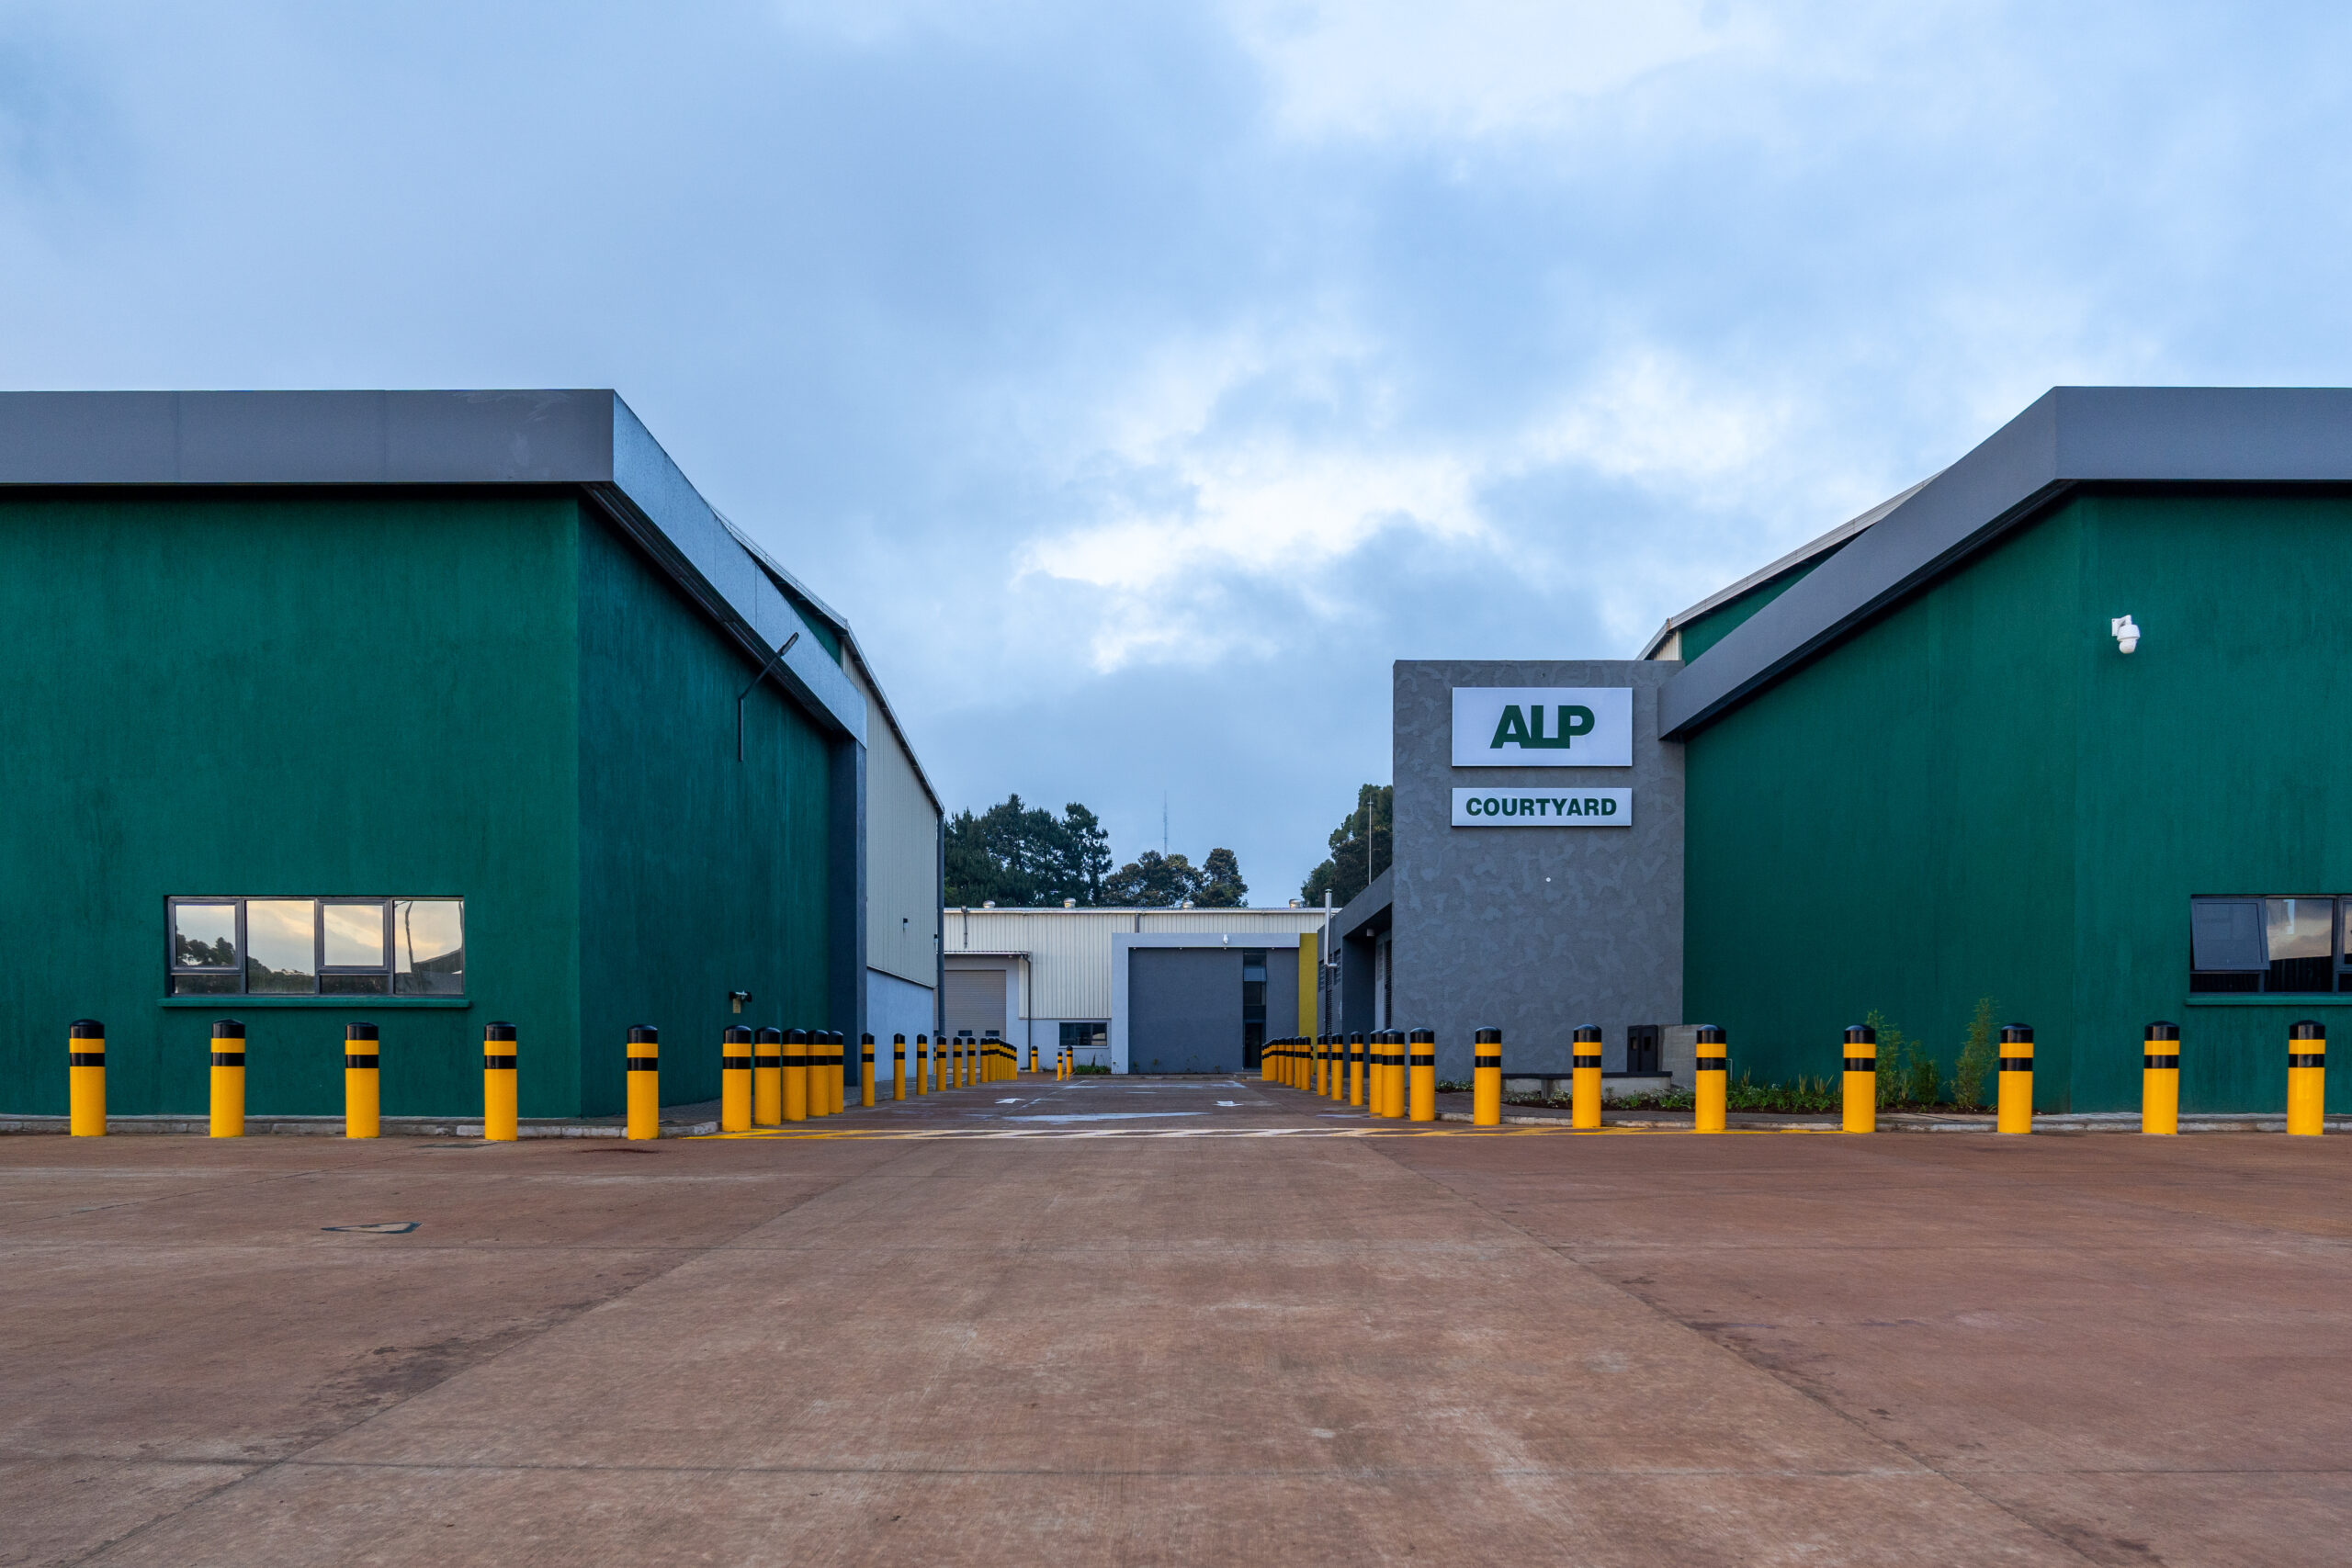 ALP West Logistics Park, entrance from the main gate with view of the Courtyard